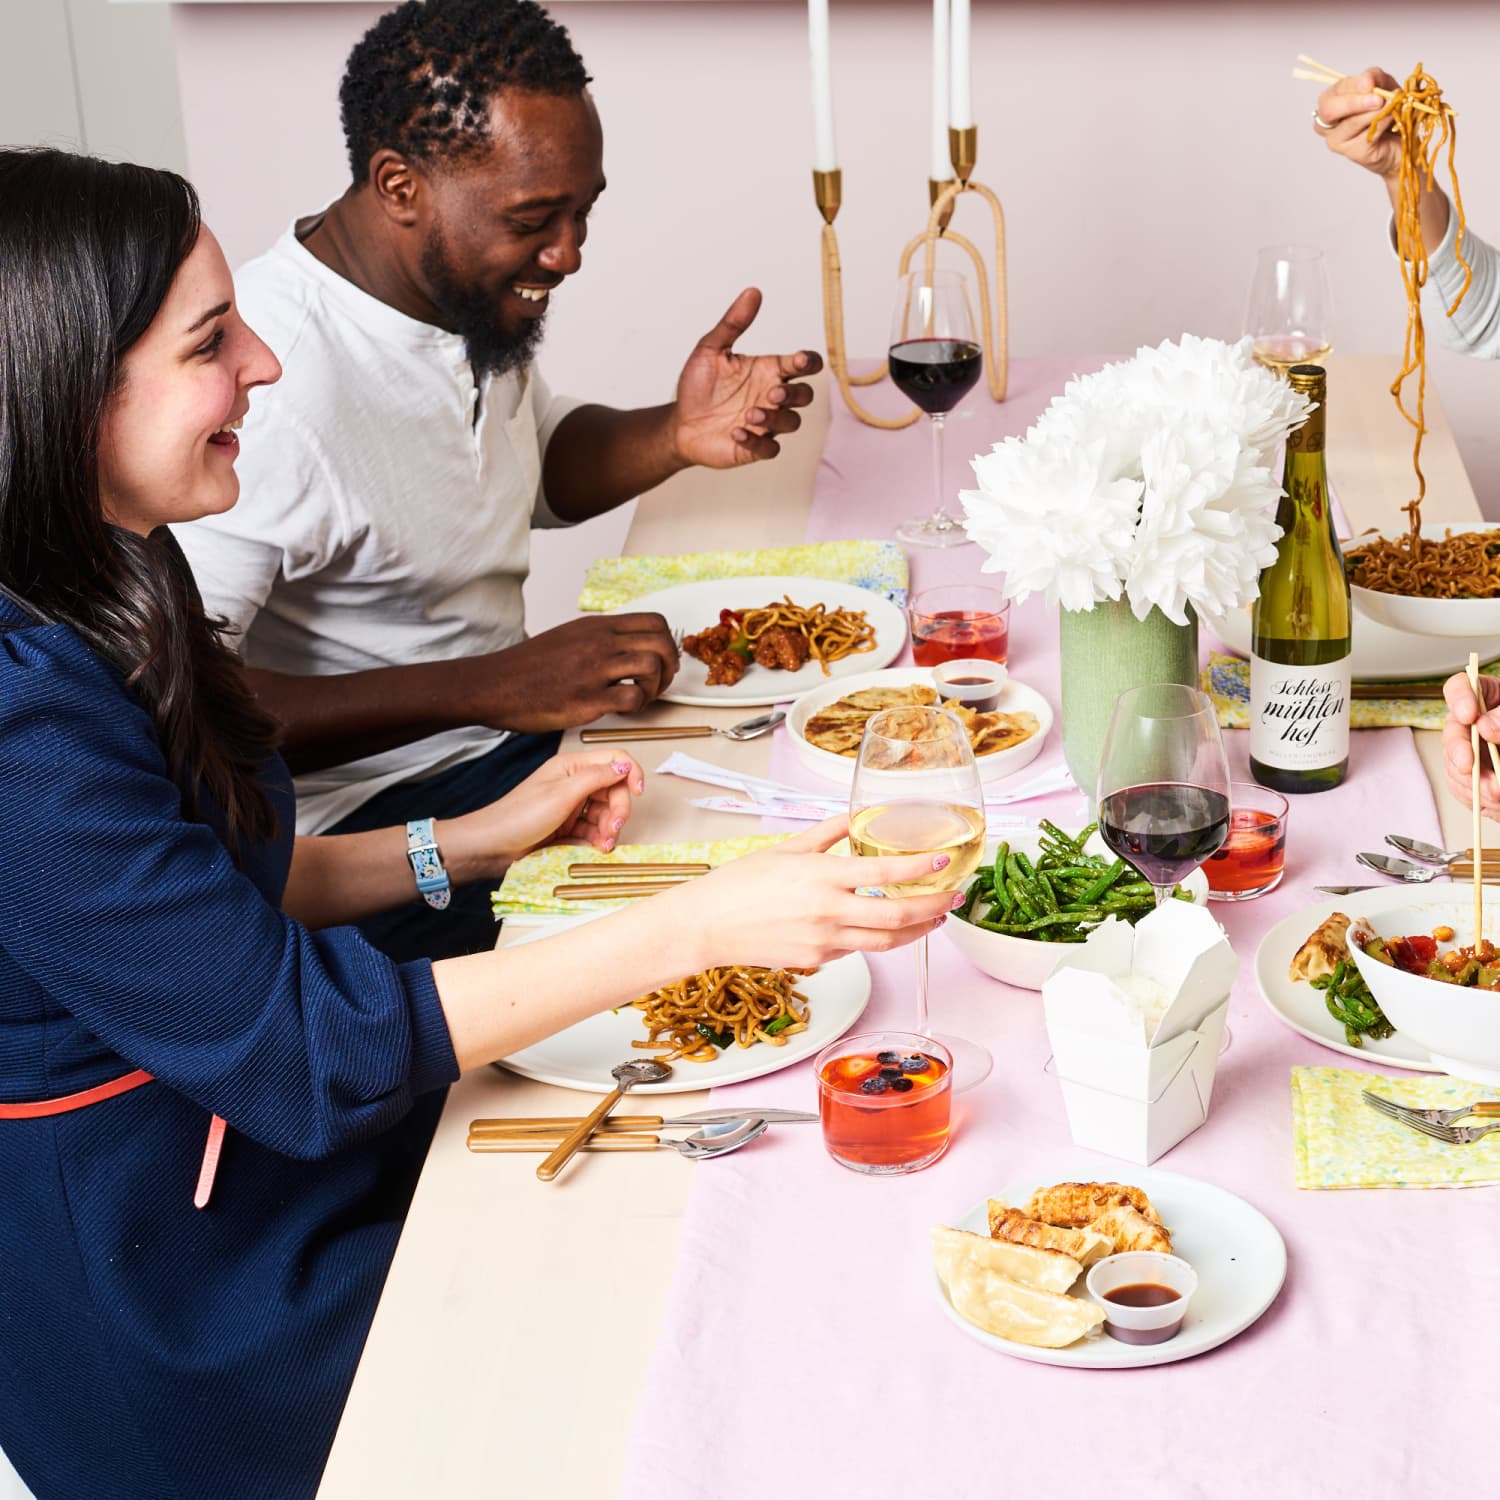 How to Host a Dinner Party: What Not to Do